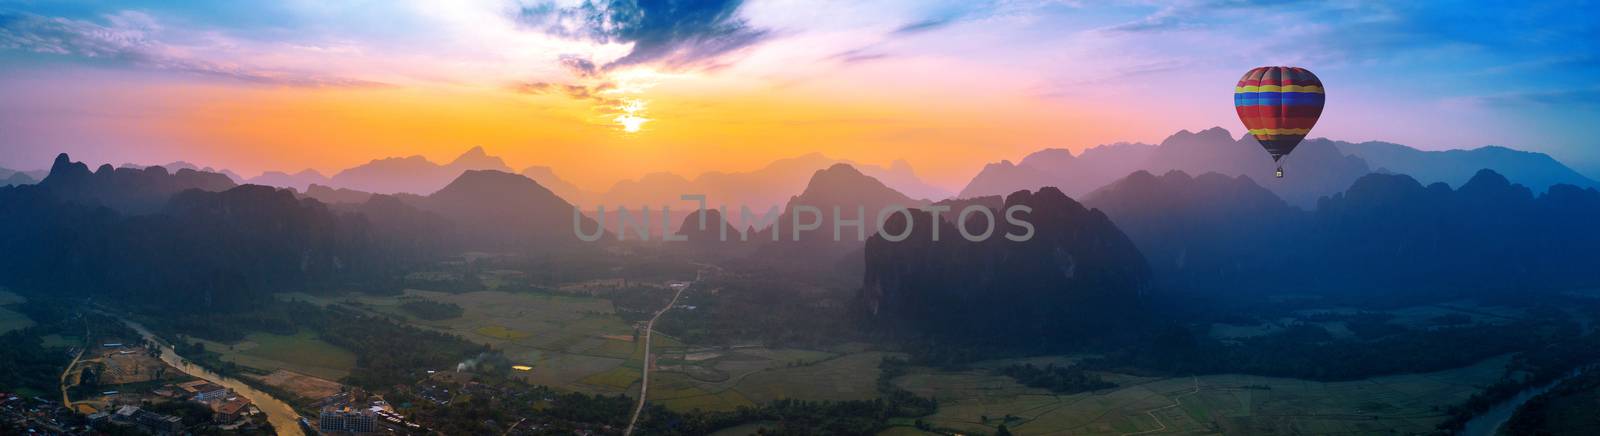 Aerial view of Vang vieng with mountains and balloon at sunset. by gutarphotoghaphy